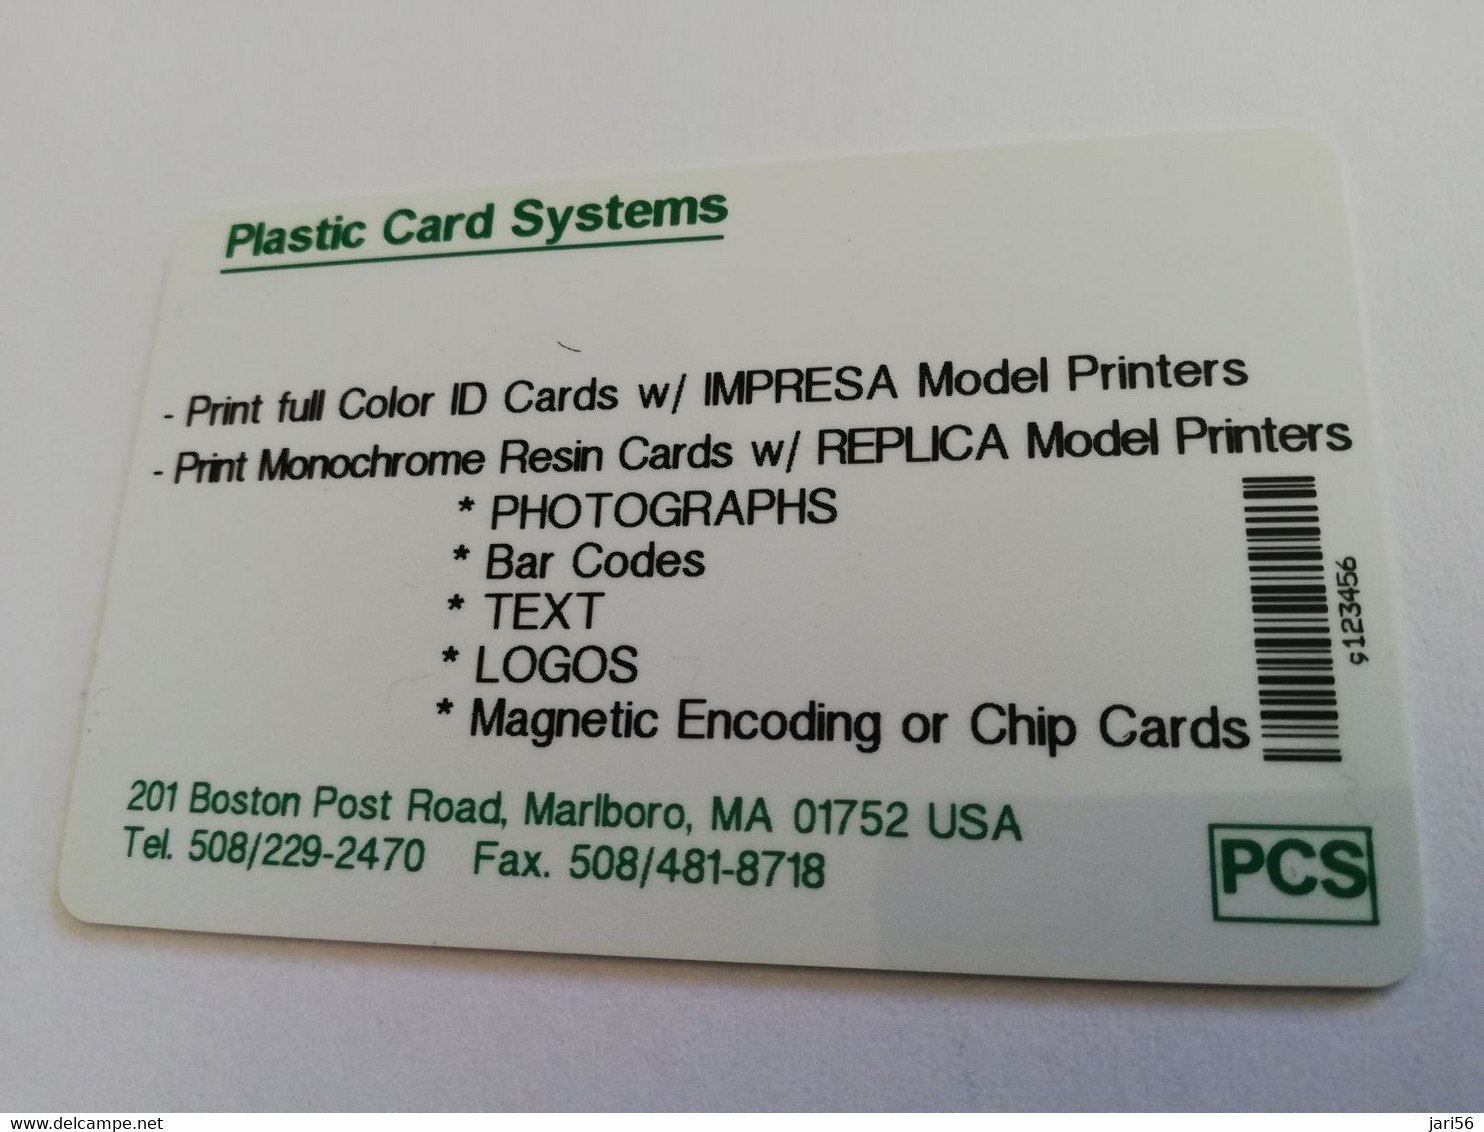 USA  $25,- SAMPLE CARD PCS PHONECARD   PLASTIC CARD SYSTEMS  WHITE HOUSE    **4325** - [2] Tarjetas Con Chip